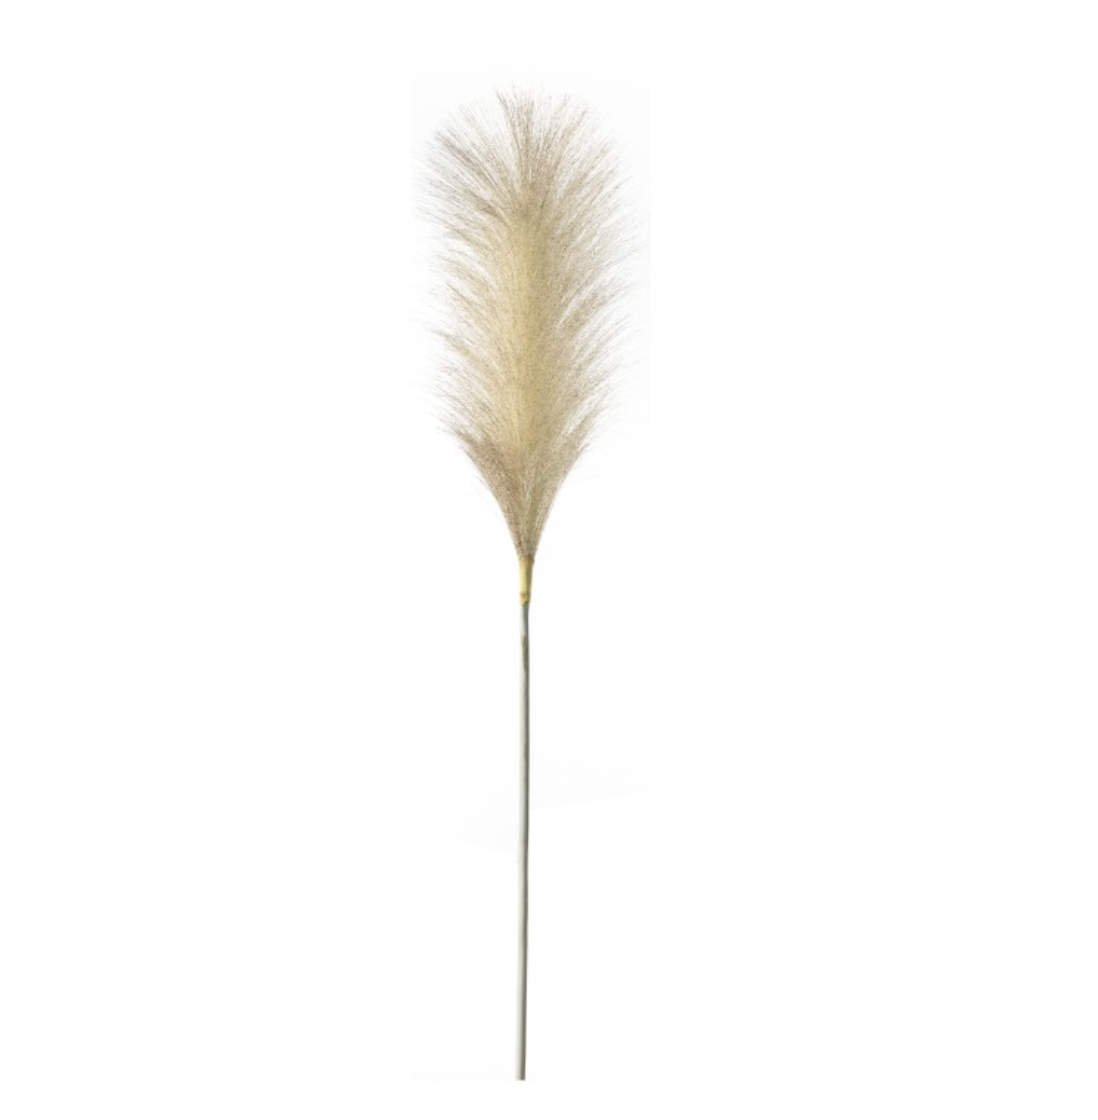 Tall Feather Stems - Blush - Pack of 5 - Outlet - Save 20%